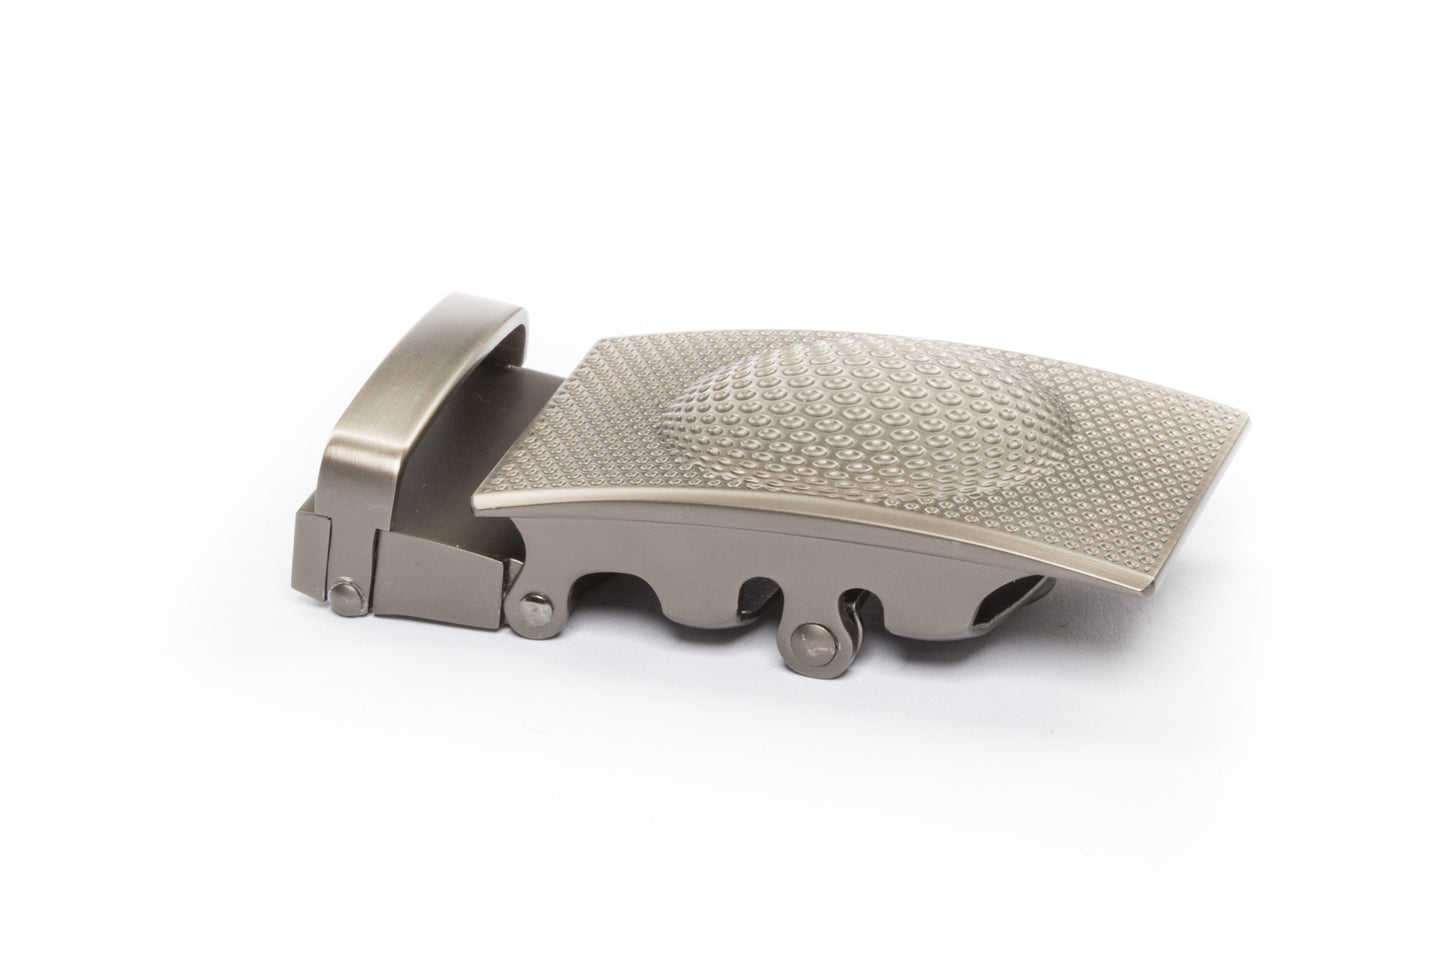 Men's golf ratchet belt buckle in gunmetal with a width of 1.5 inches, right side view.